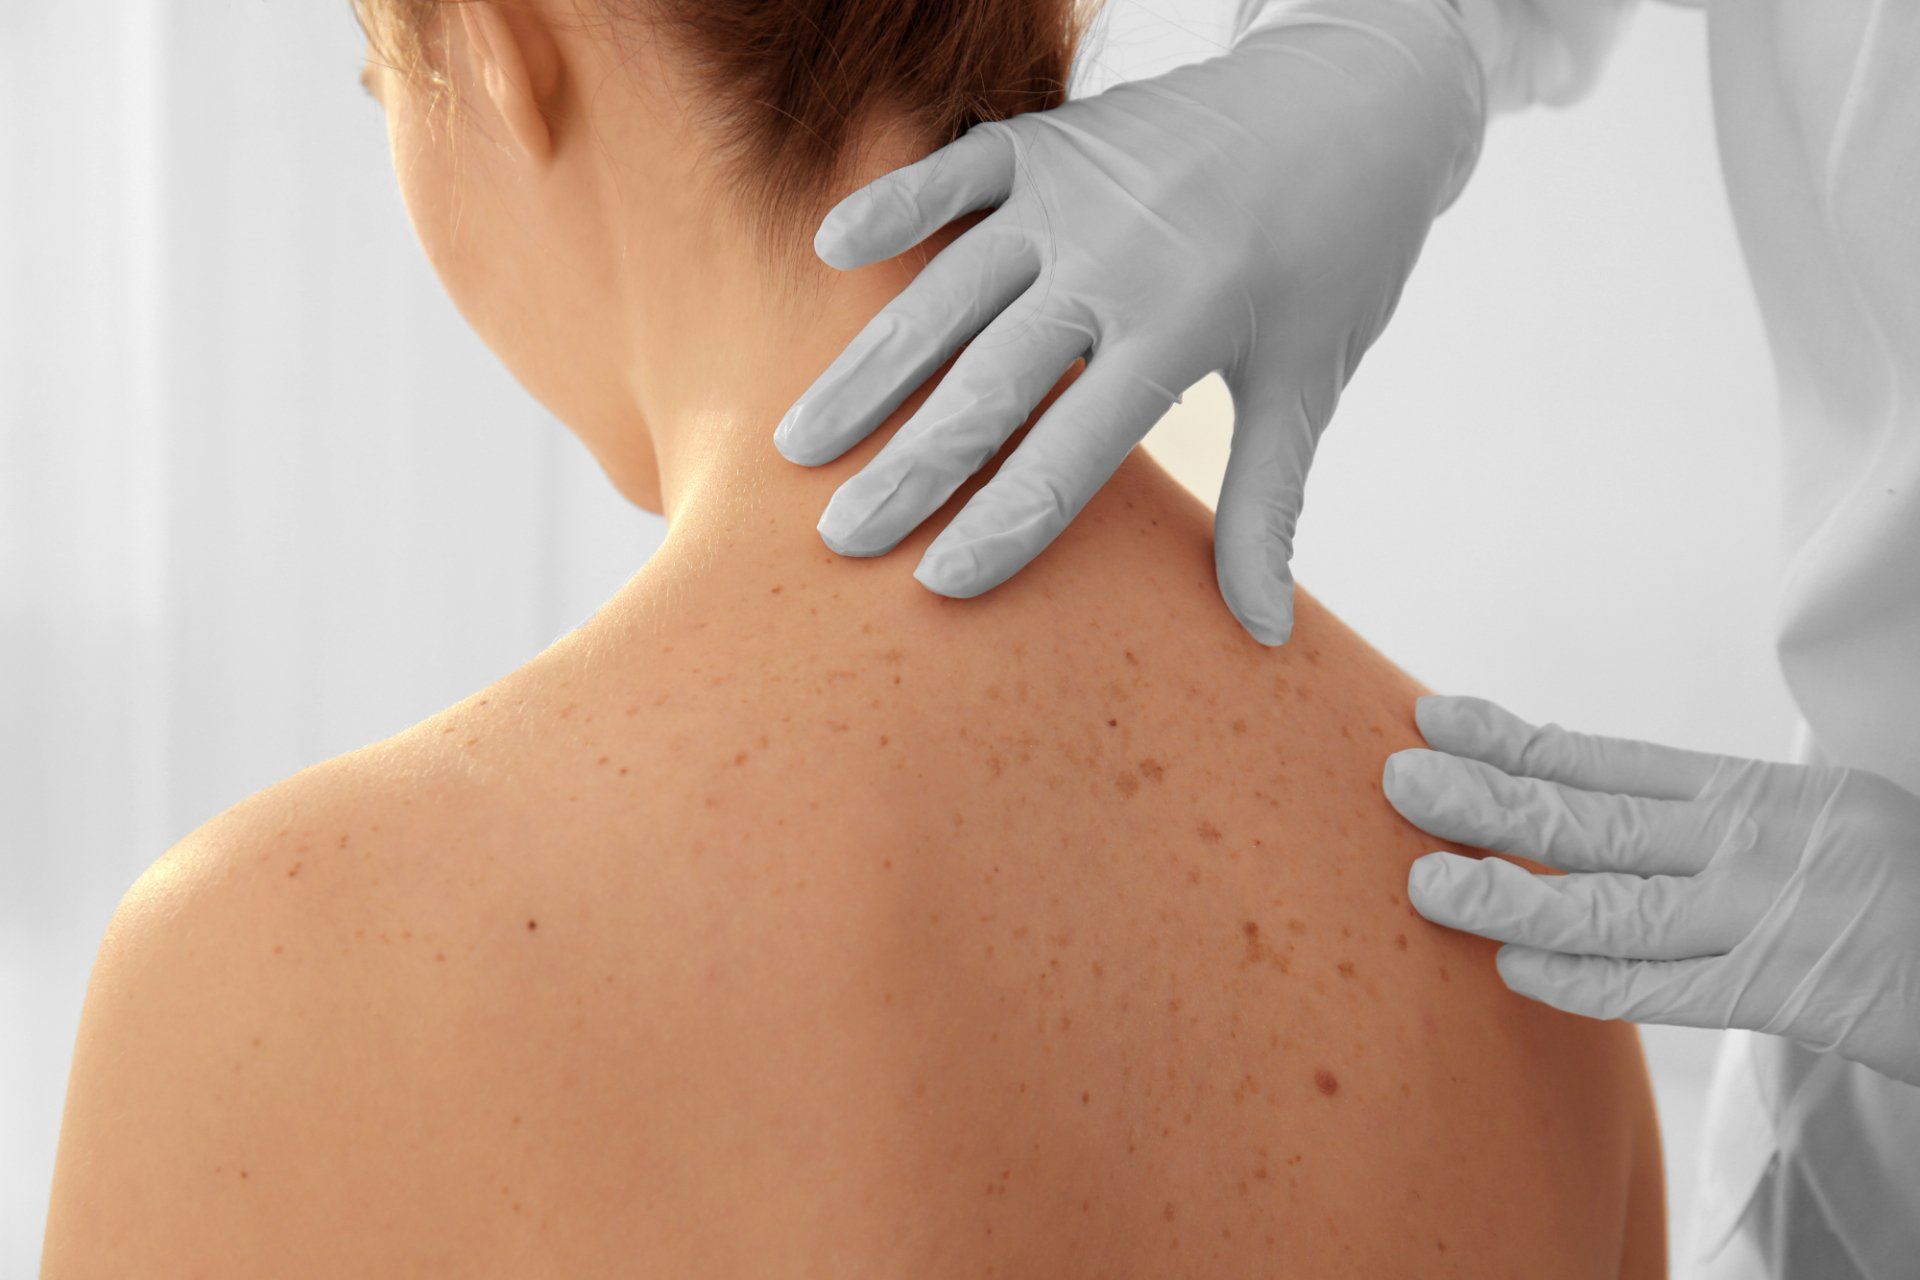 dermatologist examines patients back during skin exam